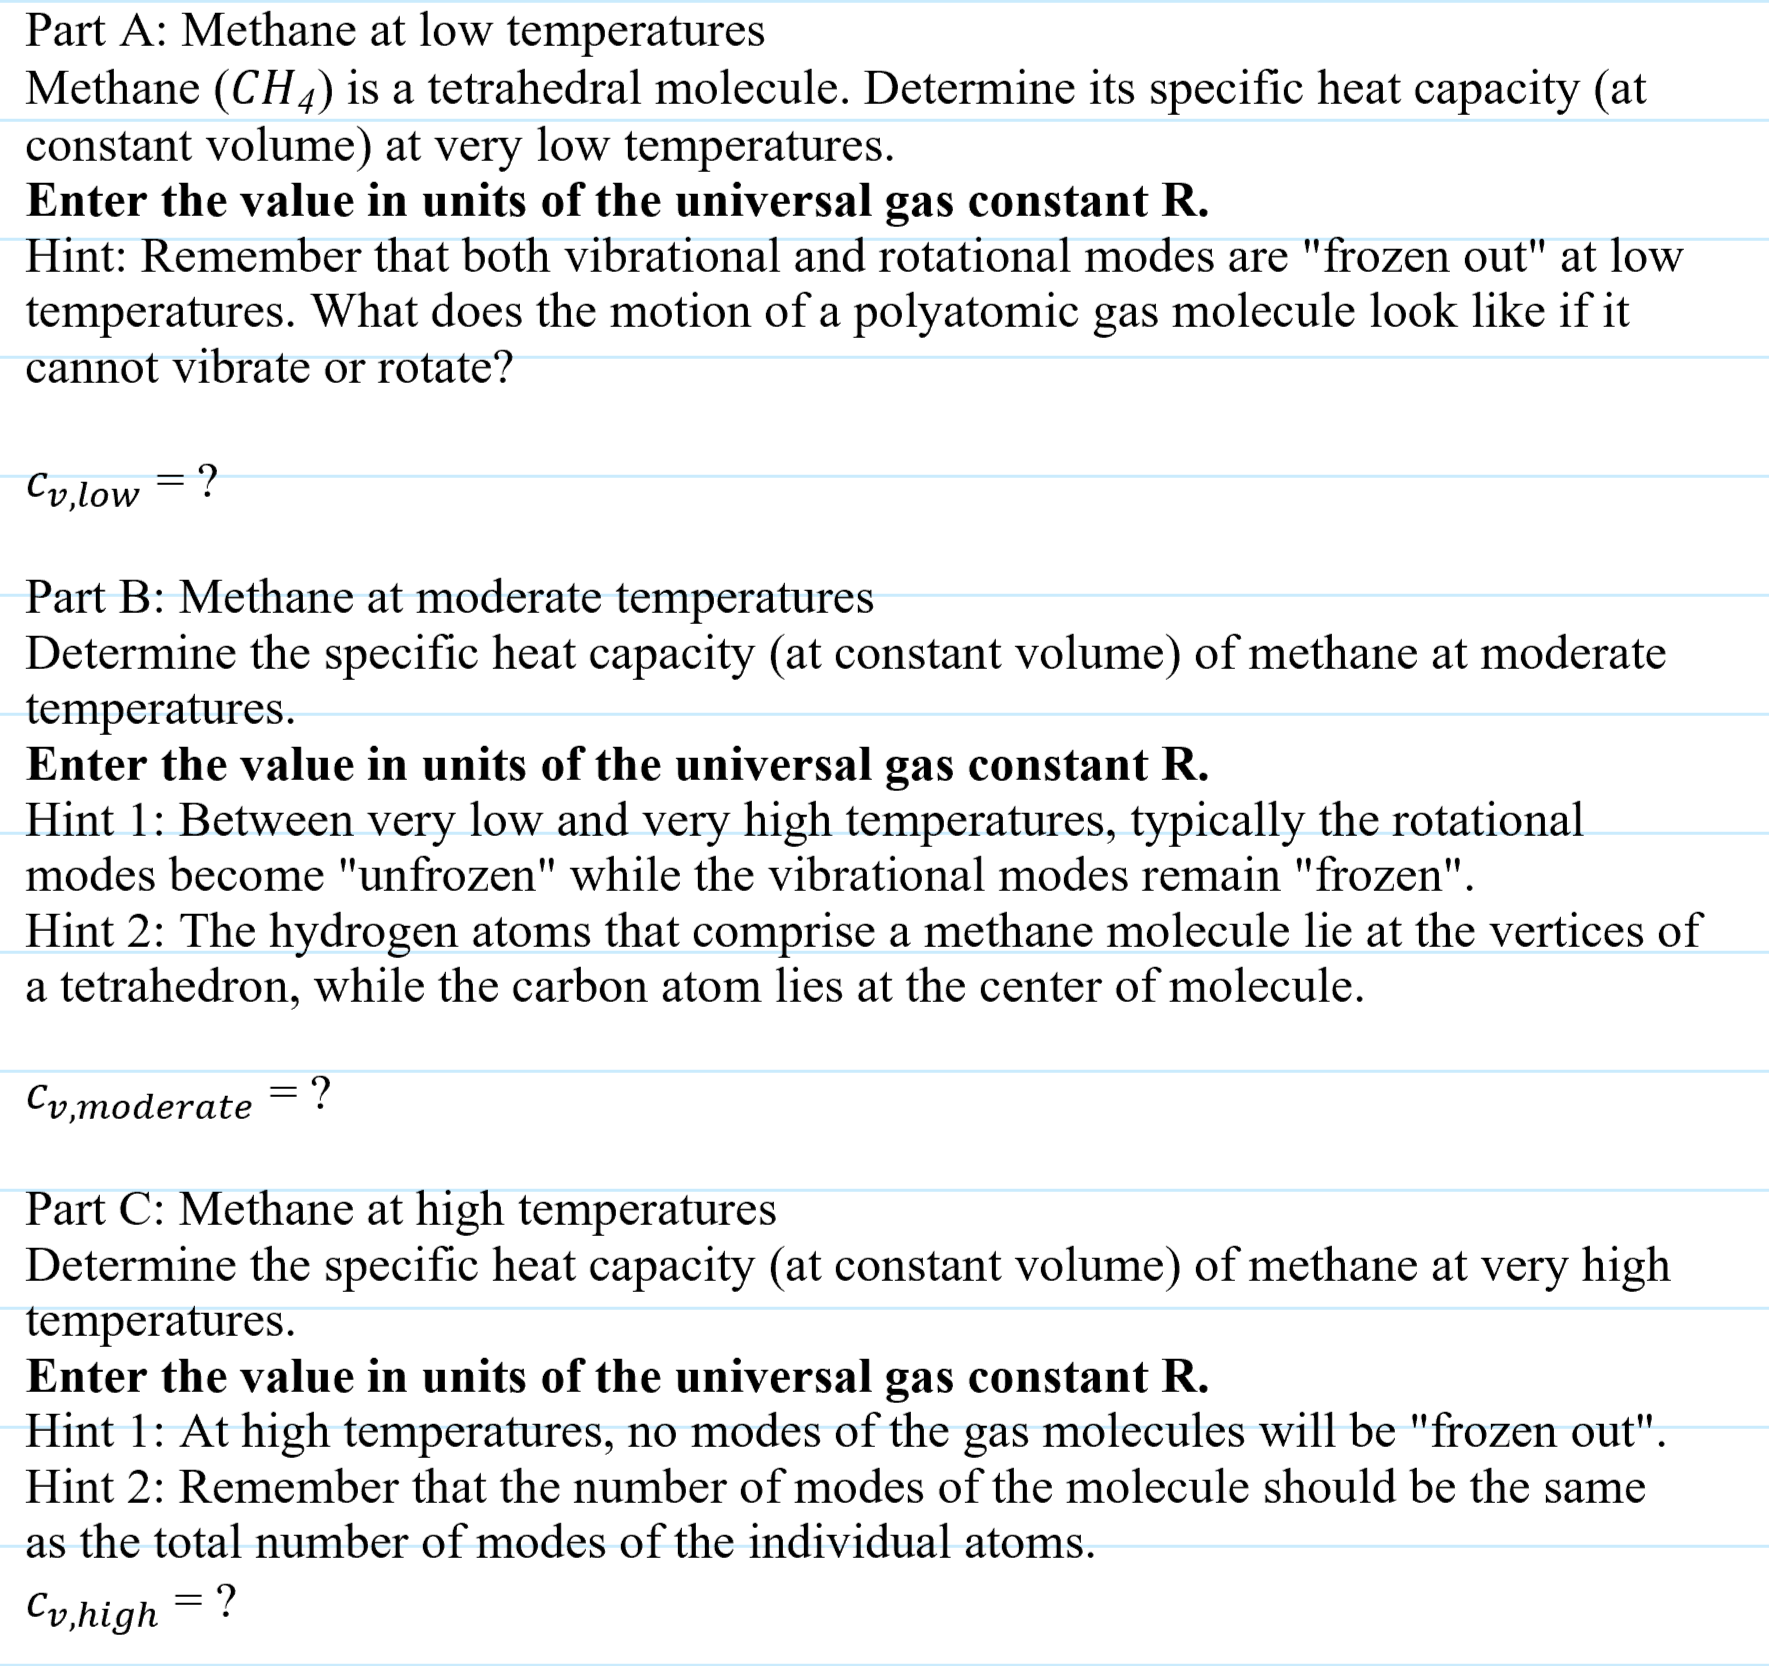 Part A: Methane at low temperatures
Methane (CH4) is a tetrahedral molecule. Determine its specific heat capacity (at
constant volume) at very low temperatures.
Enter the value in units of the universal gas constant R.
Hint: Remember that both vibrational and rotational modes are "frozen out" at low
temperatures. What does the motion of a polyatomic gas molecule look like if it
cannot vibrate or rotate?
Cv,low = ?
Part B: Methane at moderate temperatures
Determine the specific heat capacity (at constant volume) of methane at moderate
temperatures.
